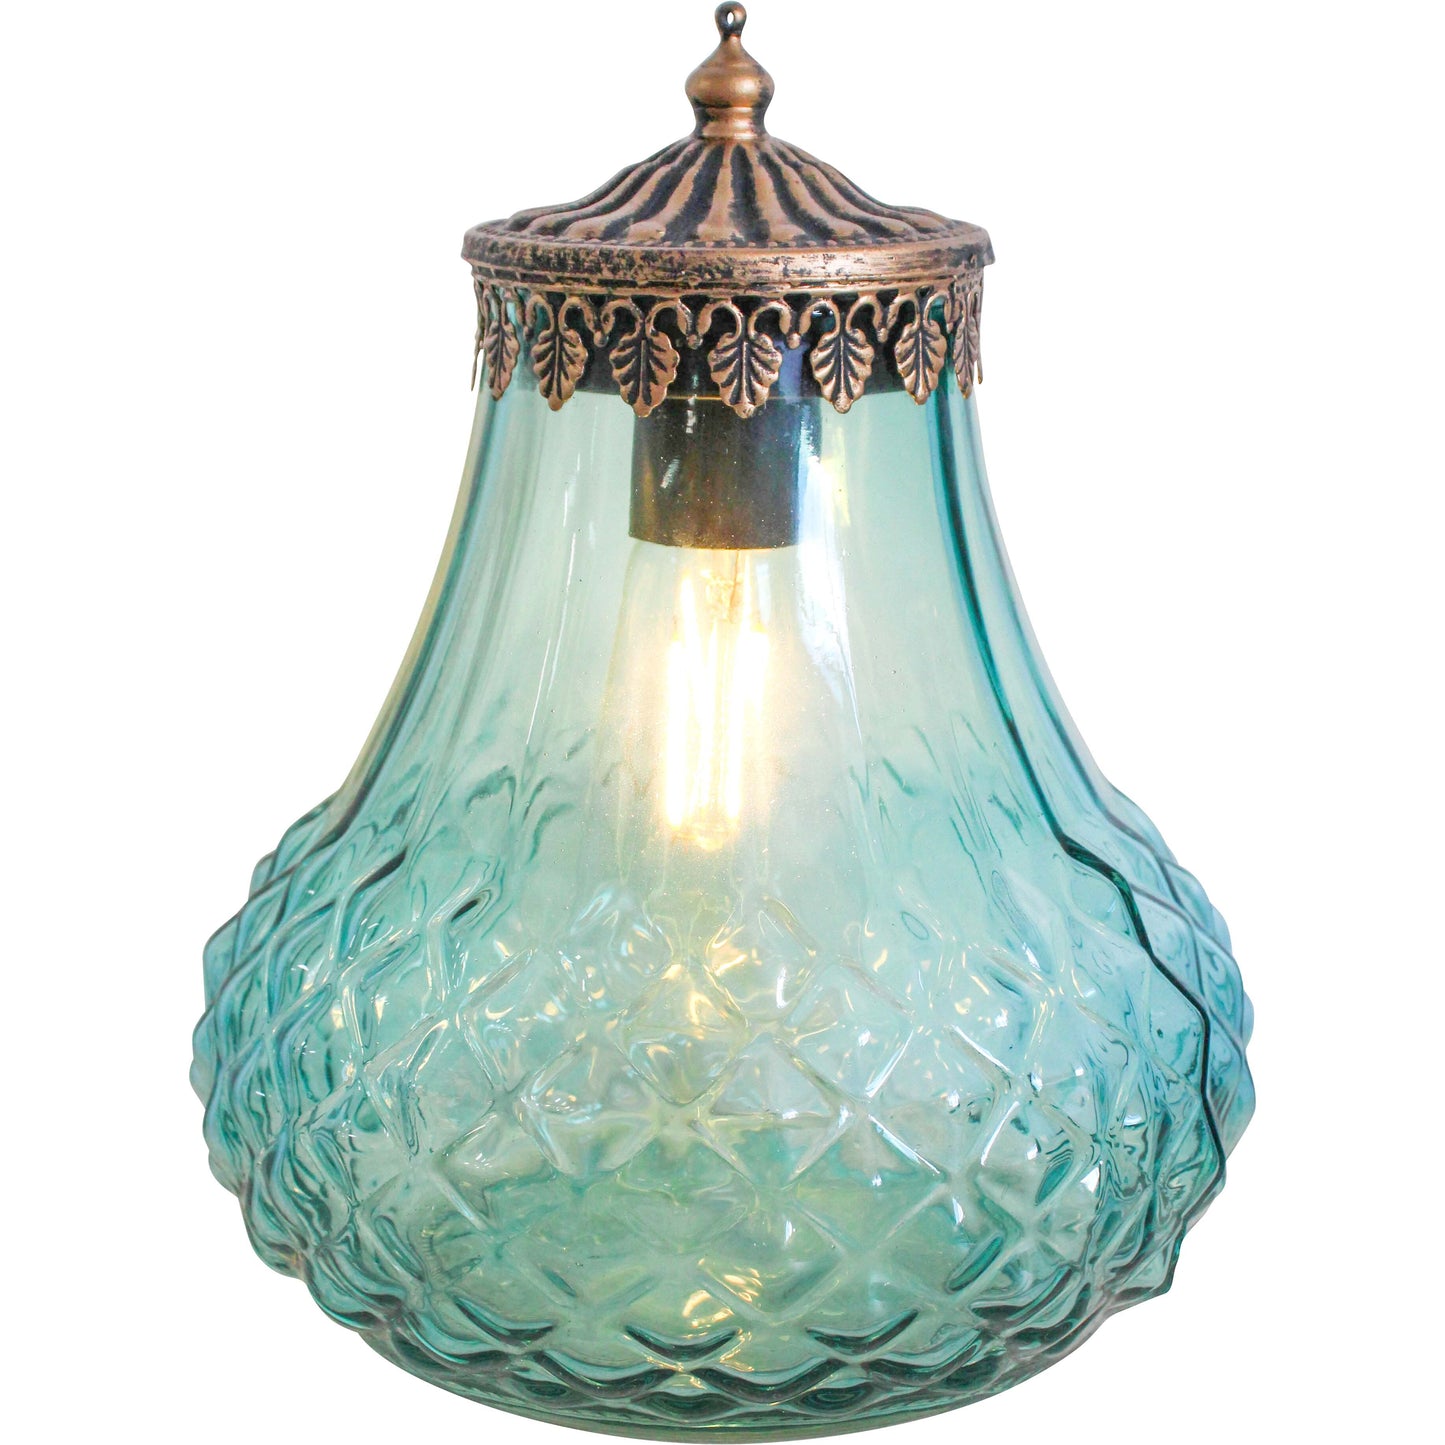 Lantern Light LED Rustic Shimmer - The Renmy Store Homewares & Gifts 